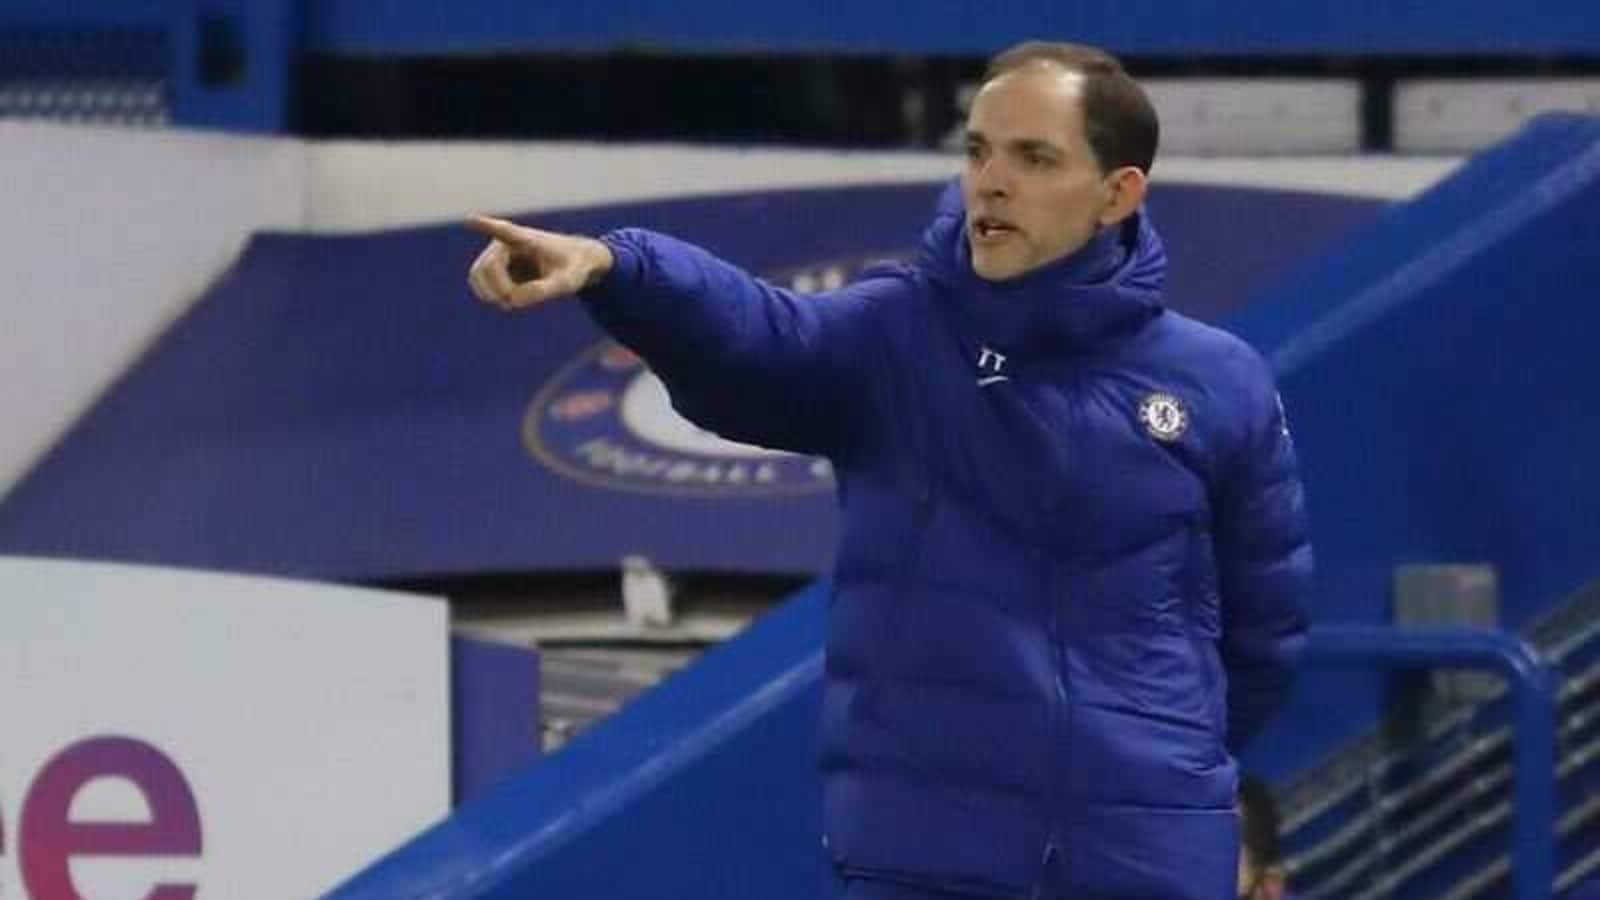 Tuchel targets titles but says nobody expects him to last long at Chelsea